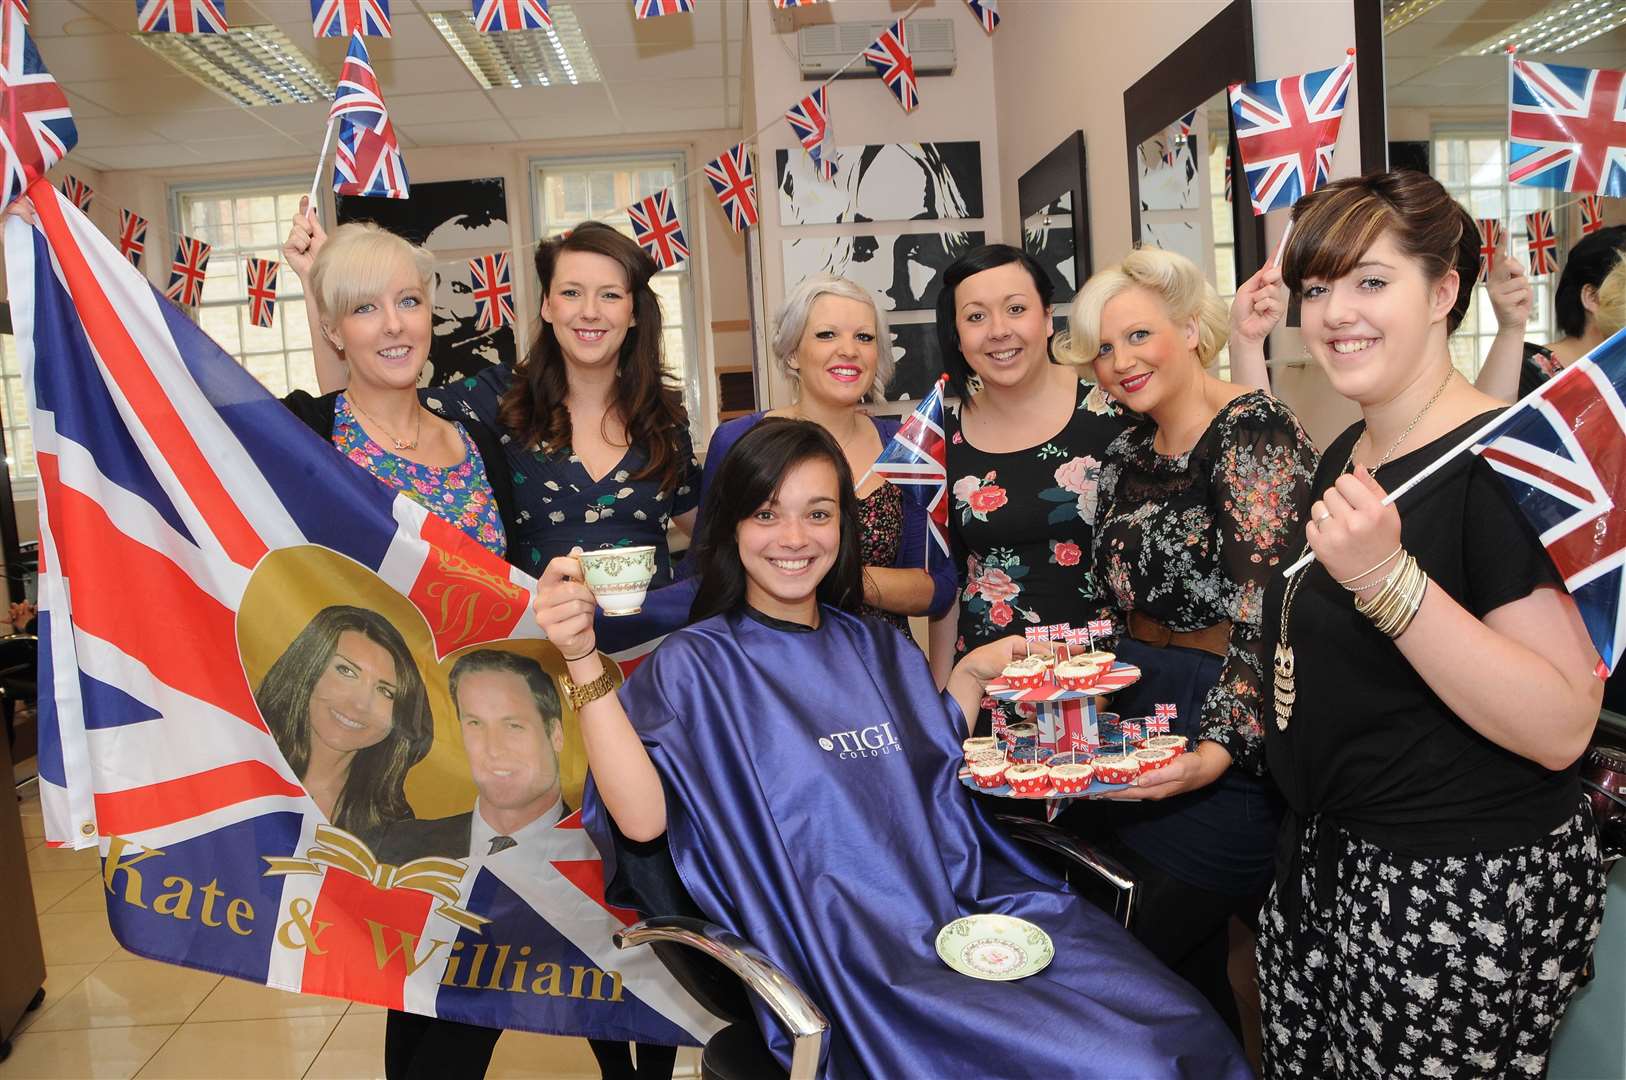 Therapy Hairdressers Canterbury, celebrate the Royal Wedding in style